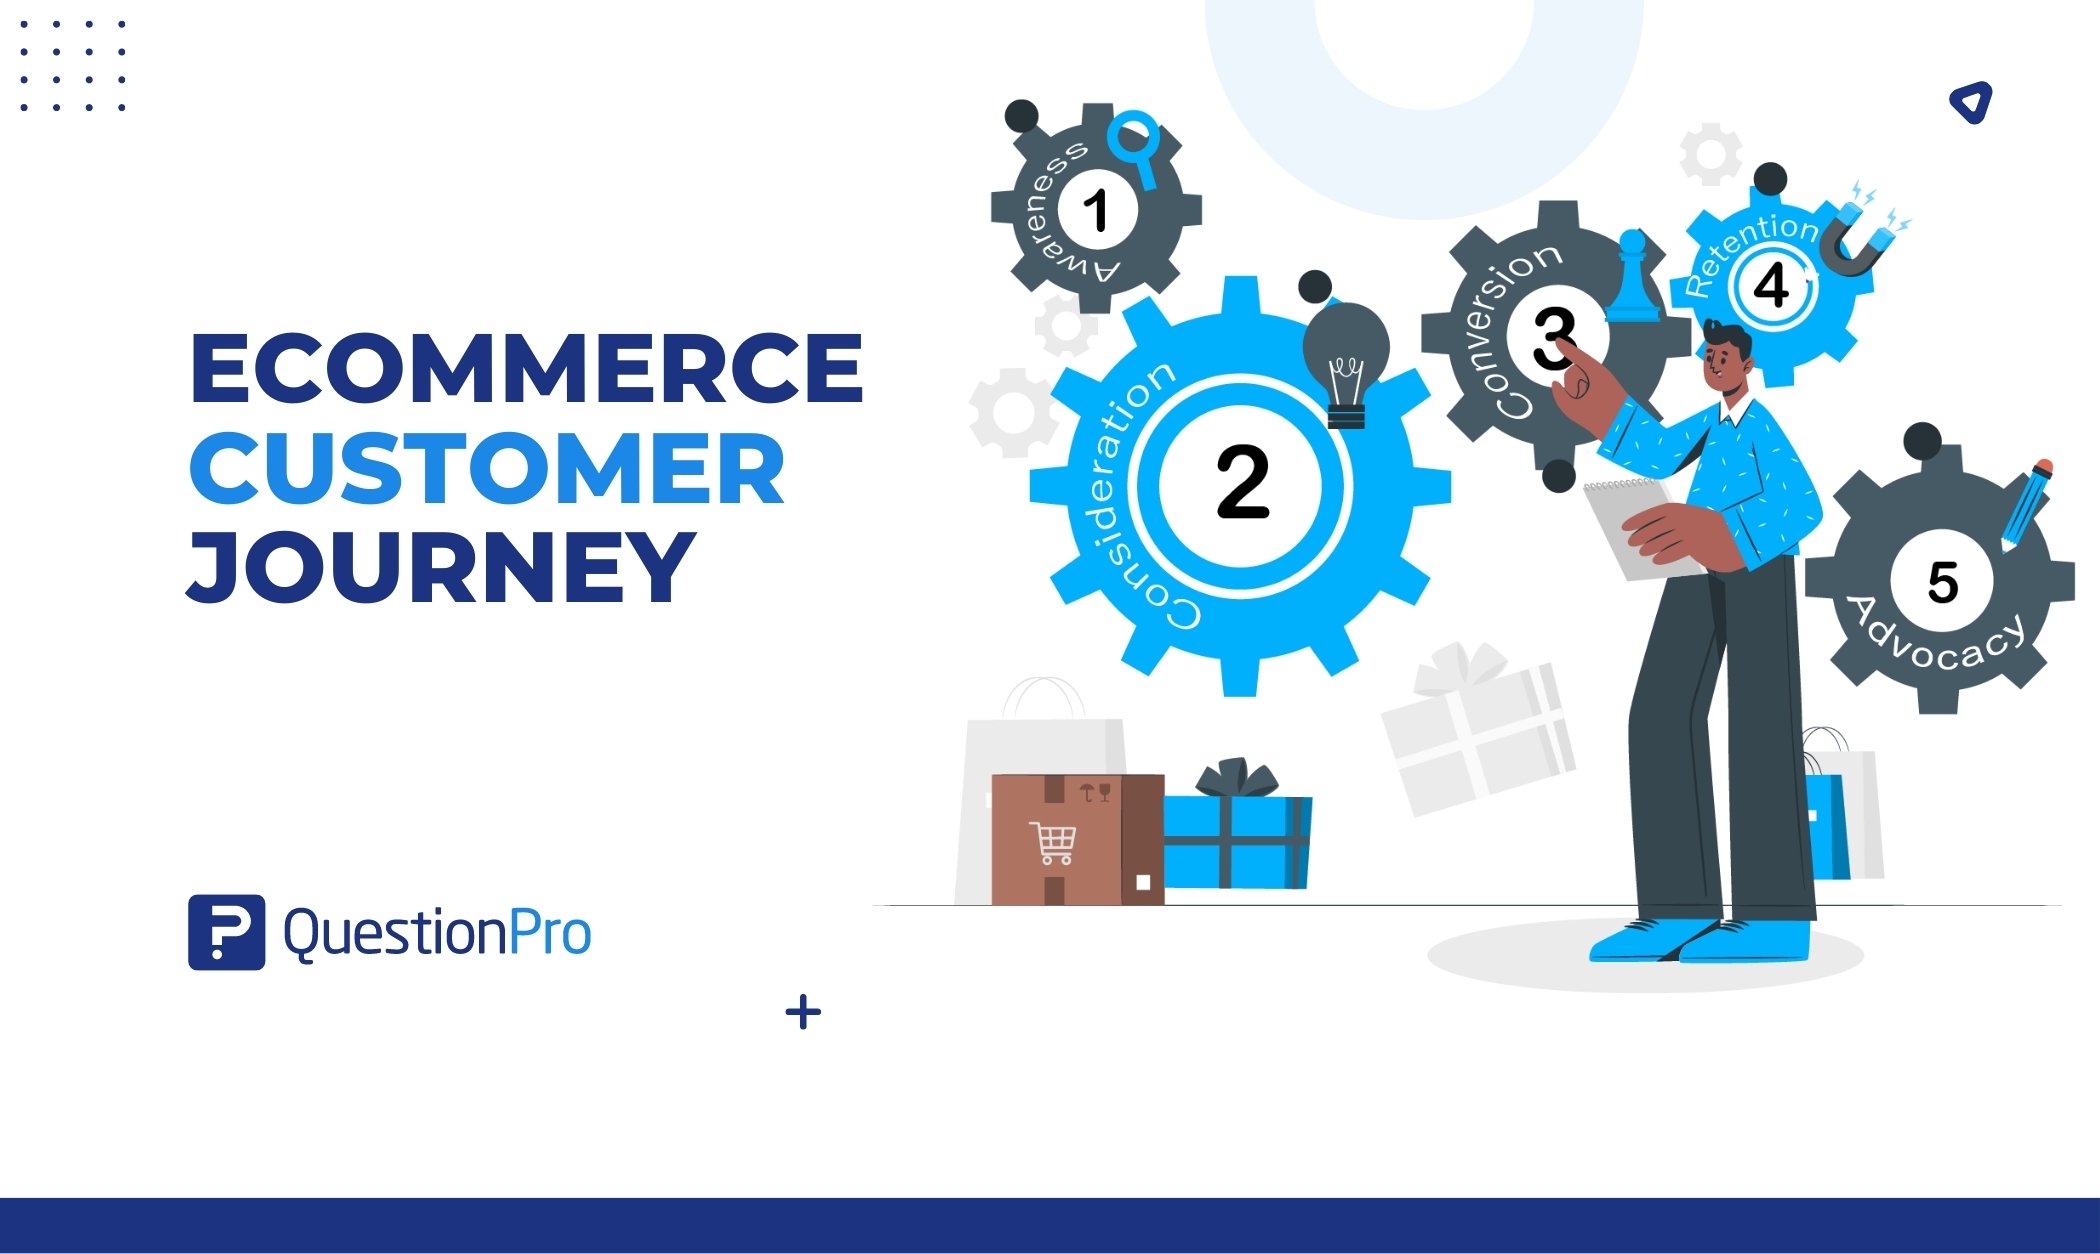 The E-commerce Customer Journey describes customers' buying and post-purchase experiences. Learn the key stages and gain insights to improve.